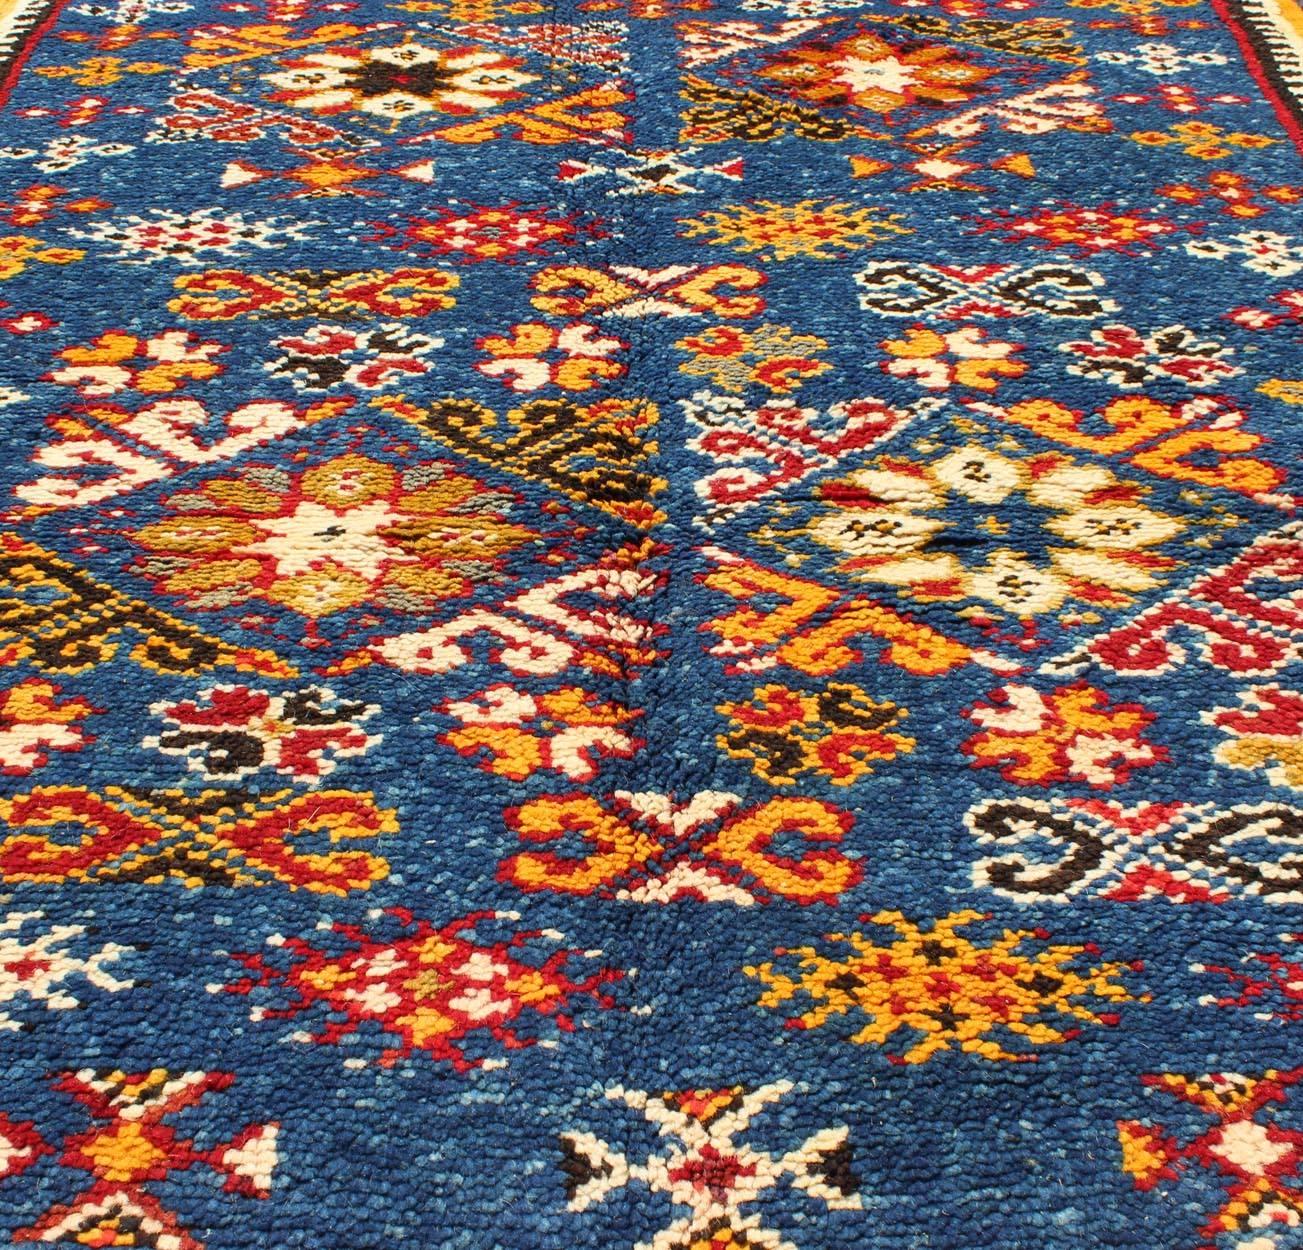 Vintage Moroccan Rug with Bright Blue Field and Colorful Geometric Motifs 3